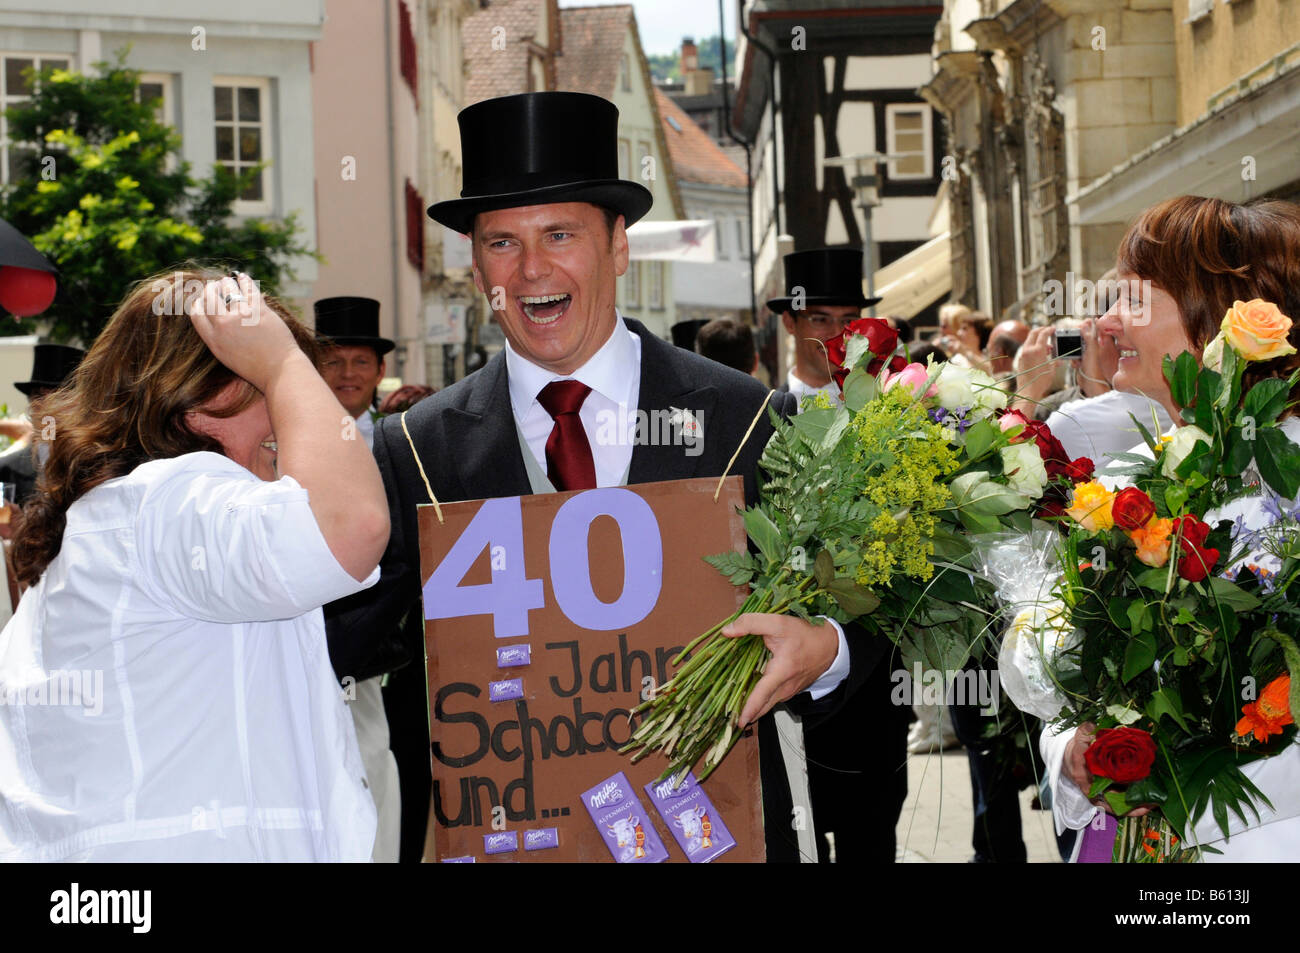 Man wearing a top hat, Gmuender city festival, parade of the 40-year-old people, Schwaebisch Gmuend, Baden-Wuerttemberg Stock Photo